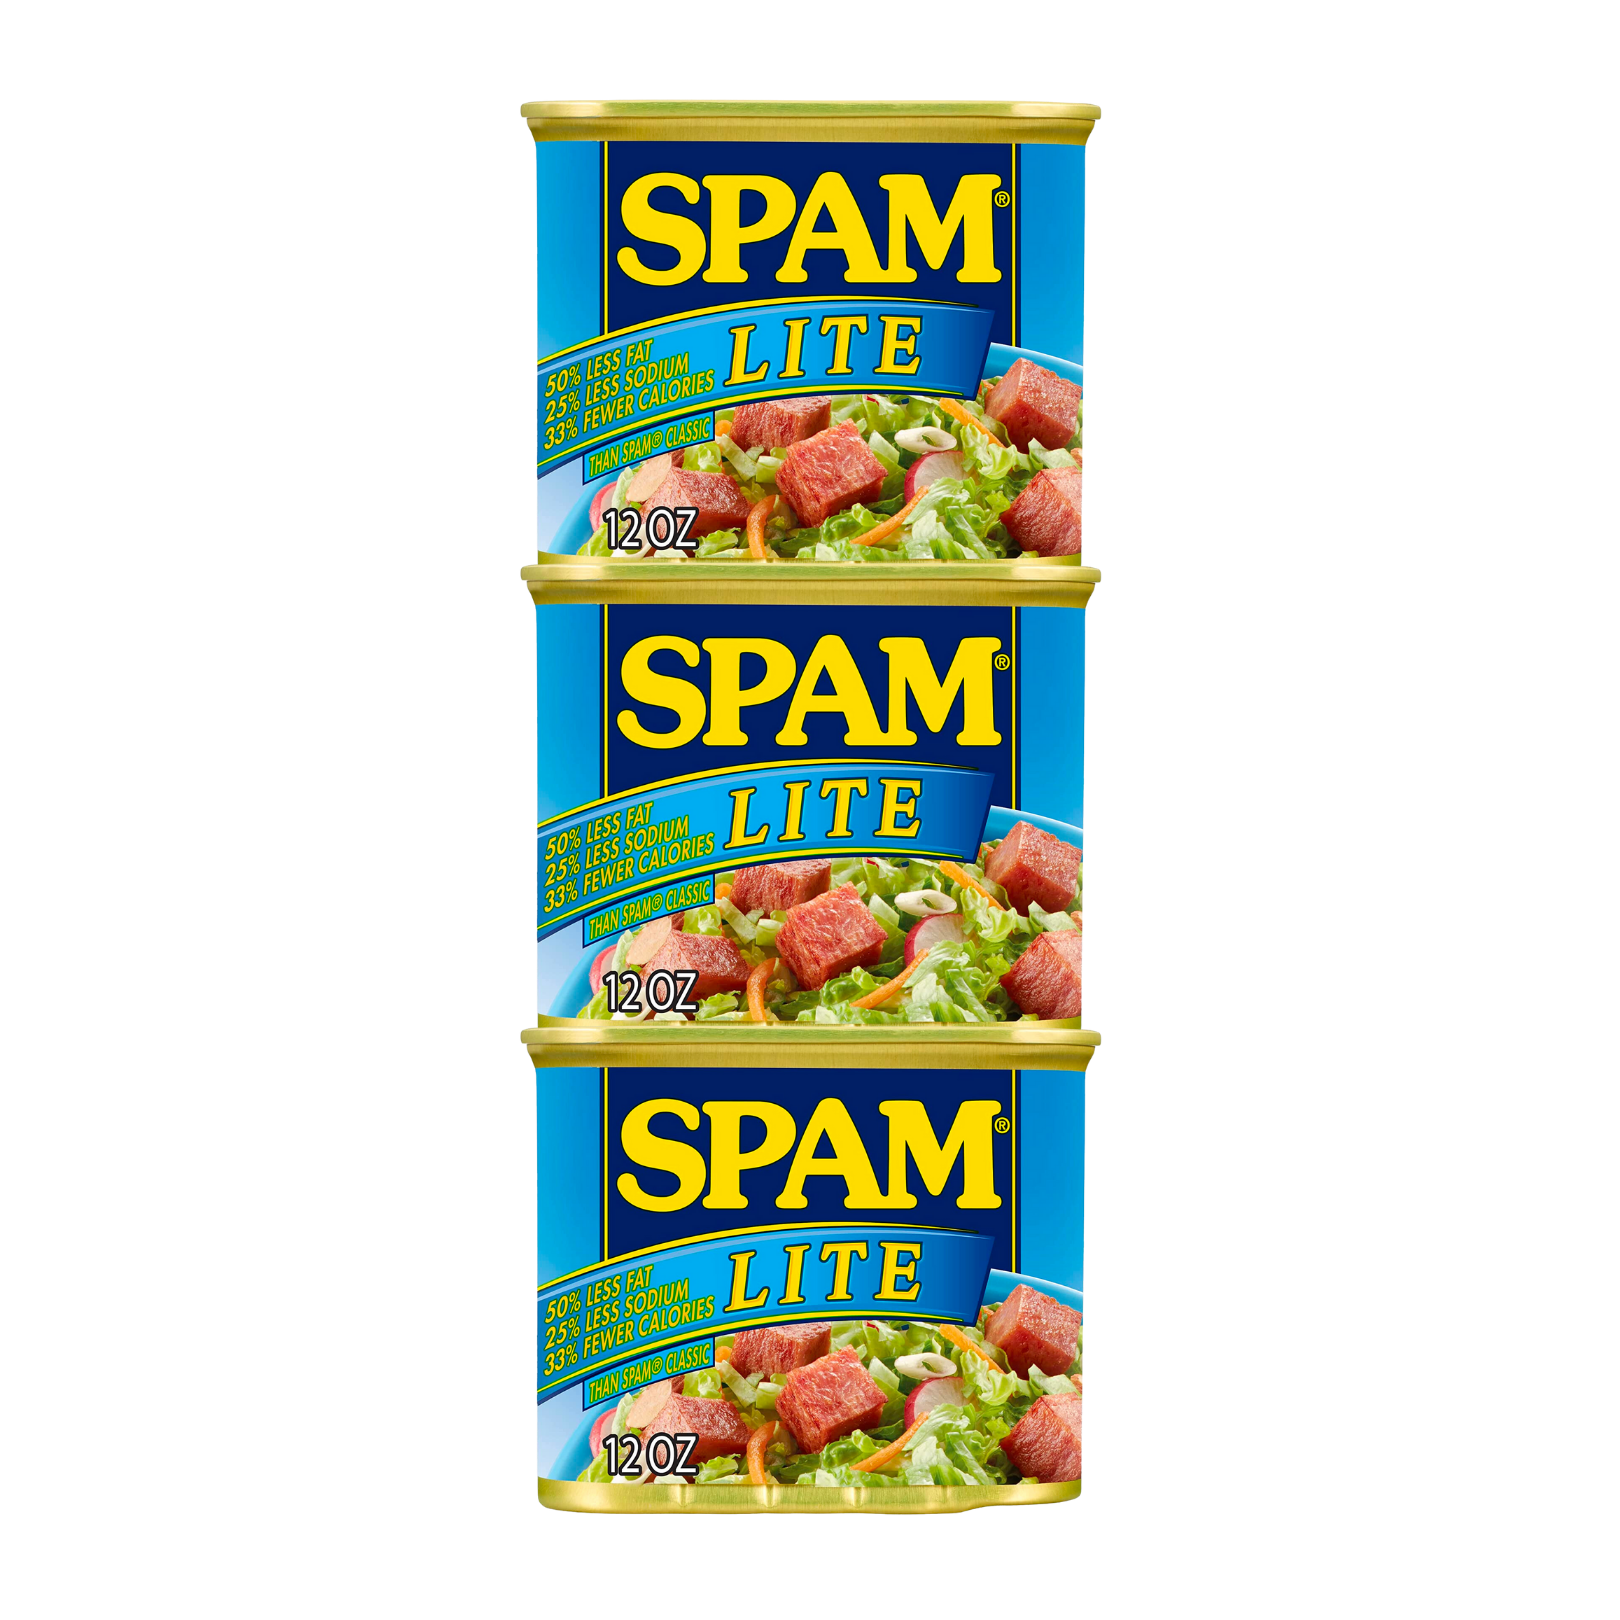 SPAM® Brand Variety Pack with FREE Slicer (12 Cans)